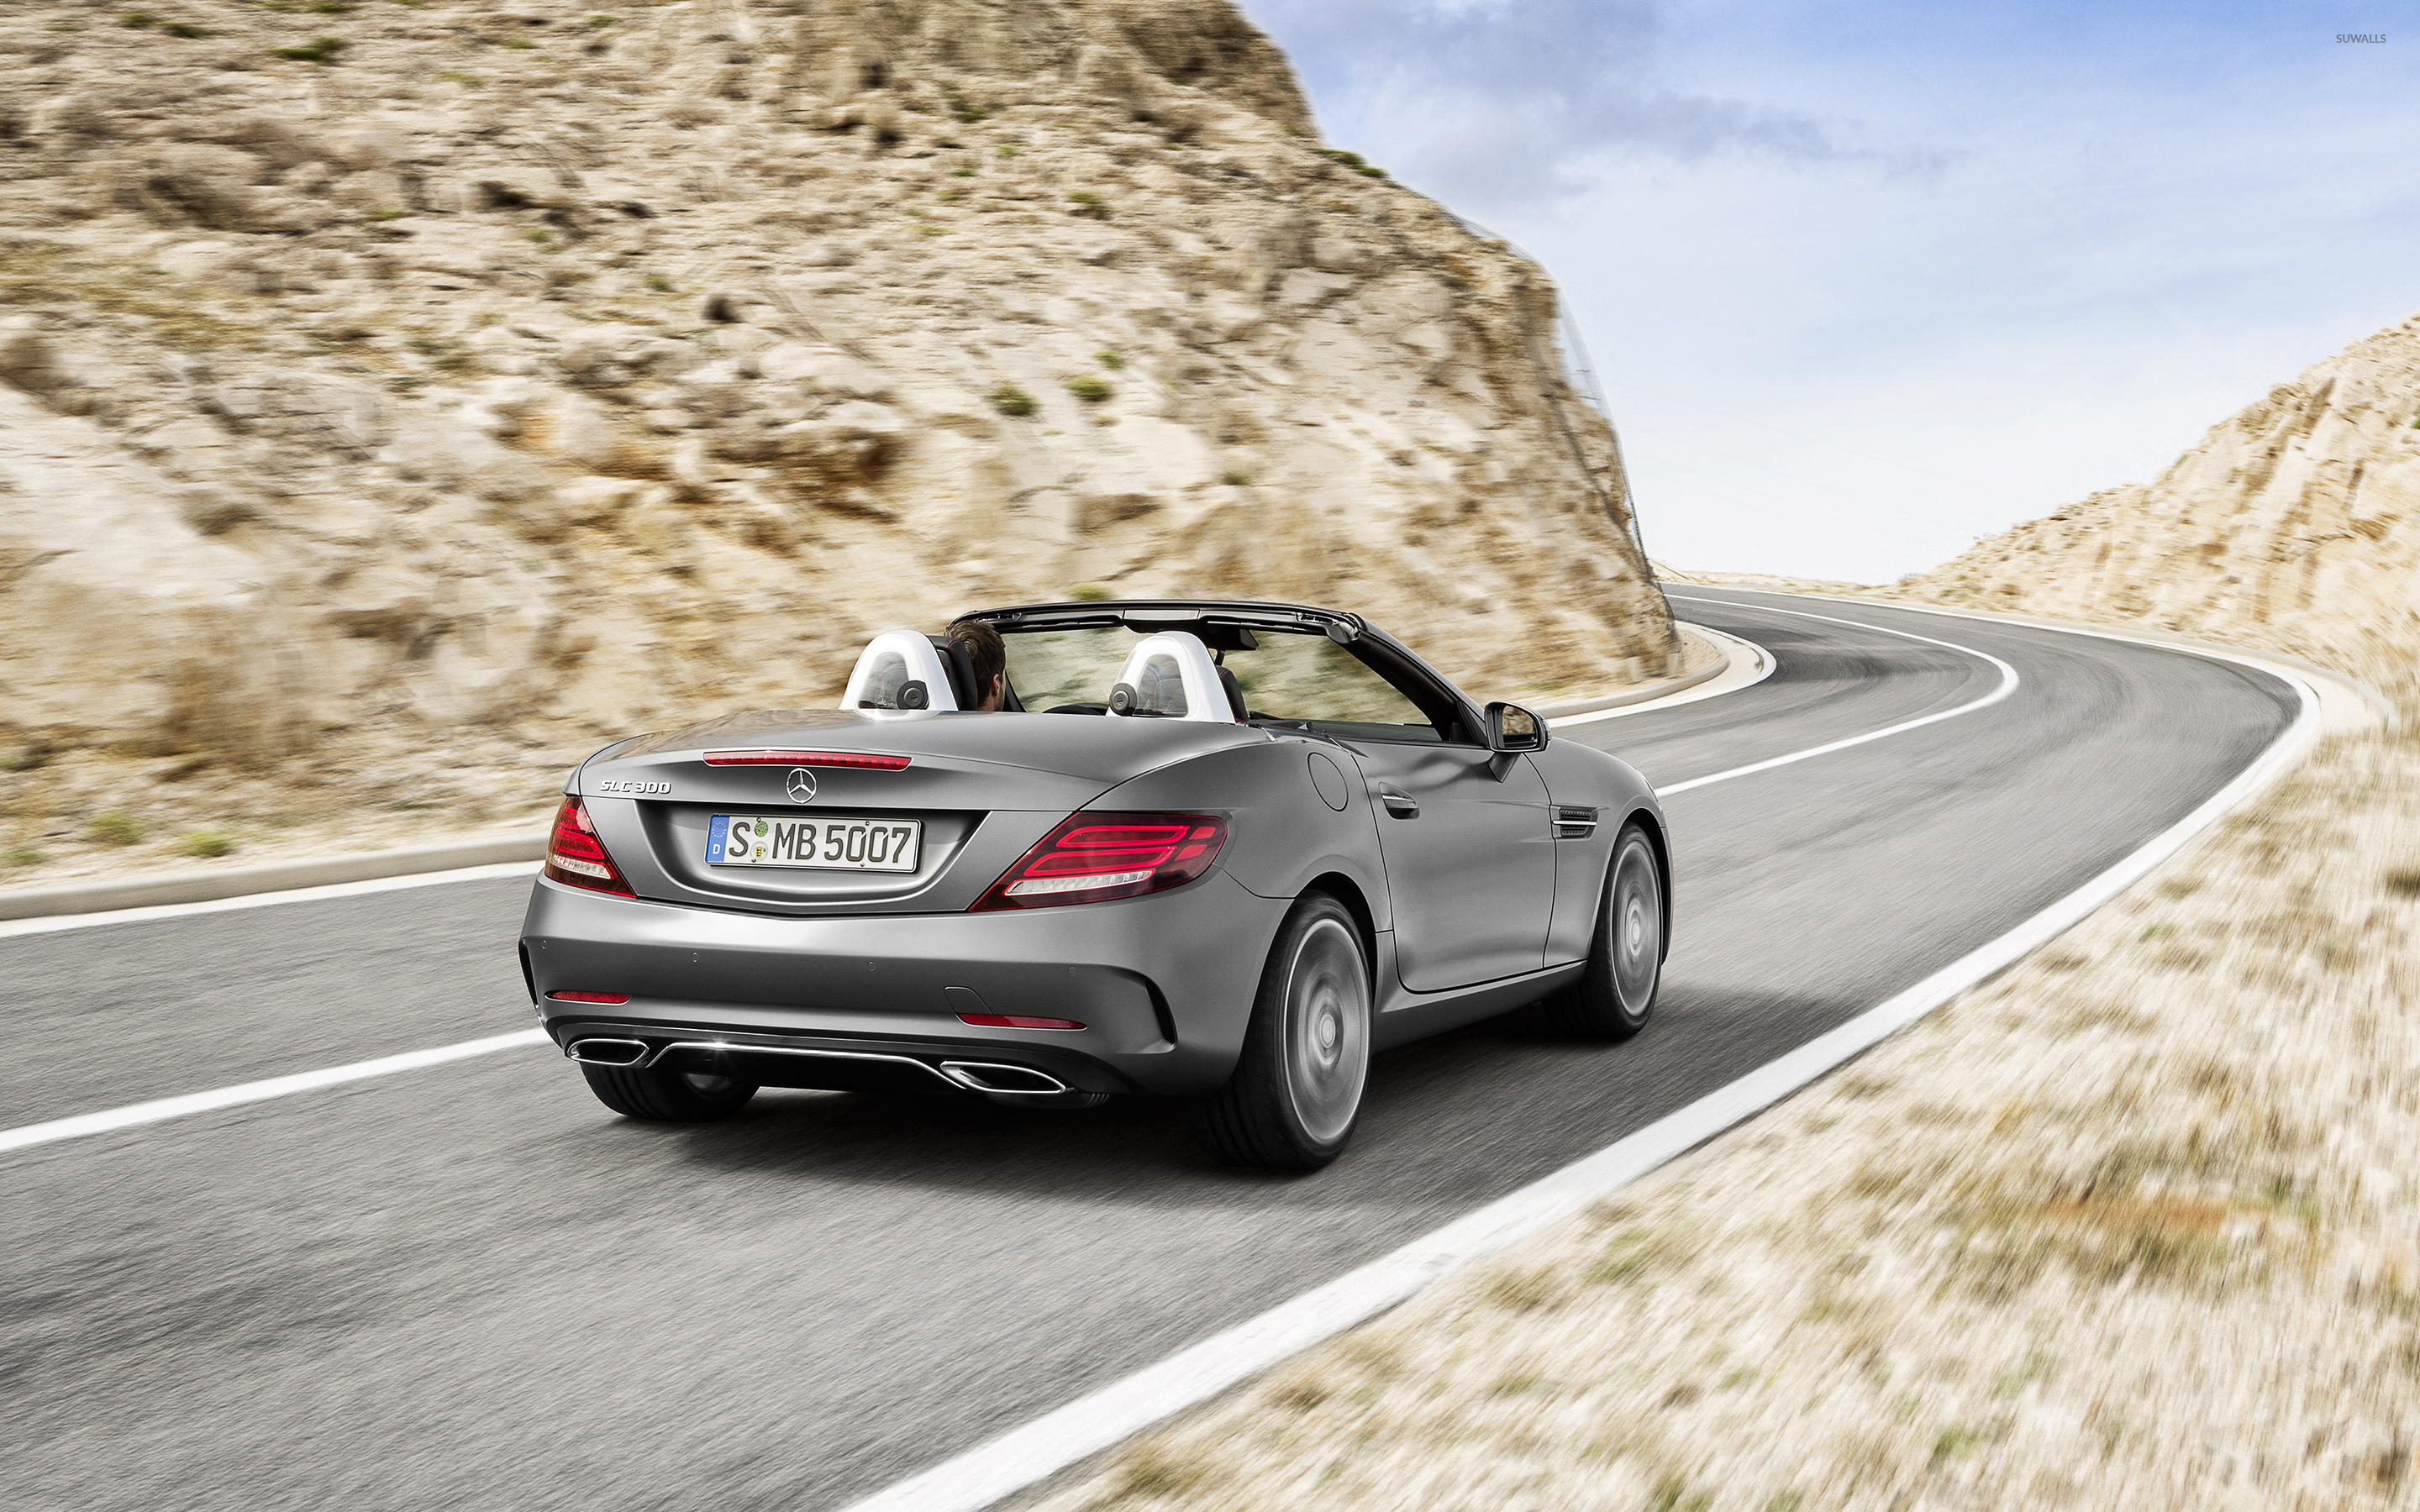 Silver Mercedes Benz Slc On The Road Wallpaper